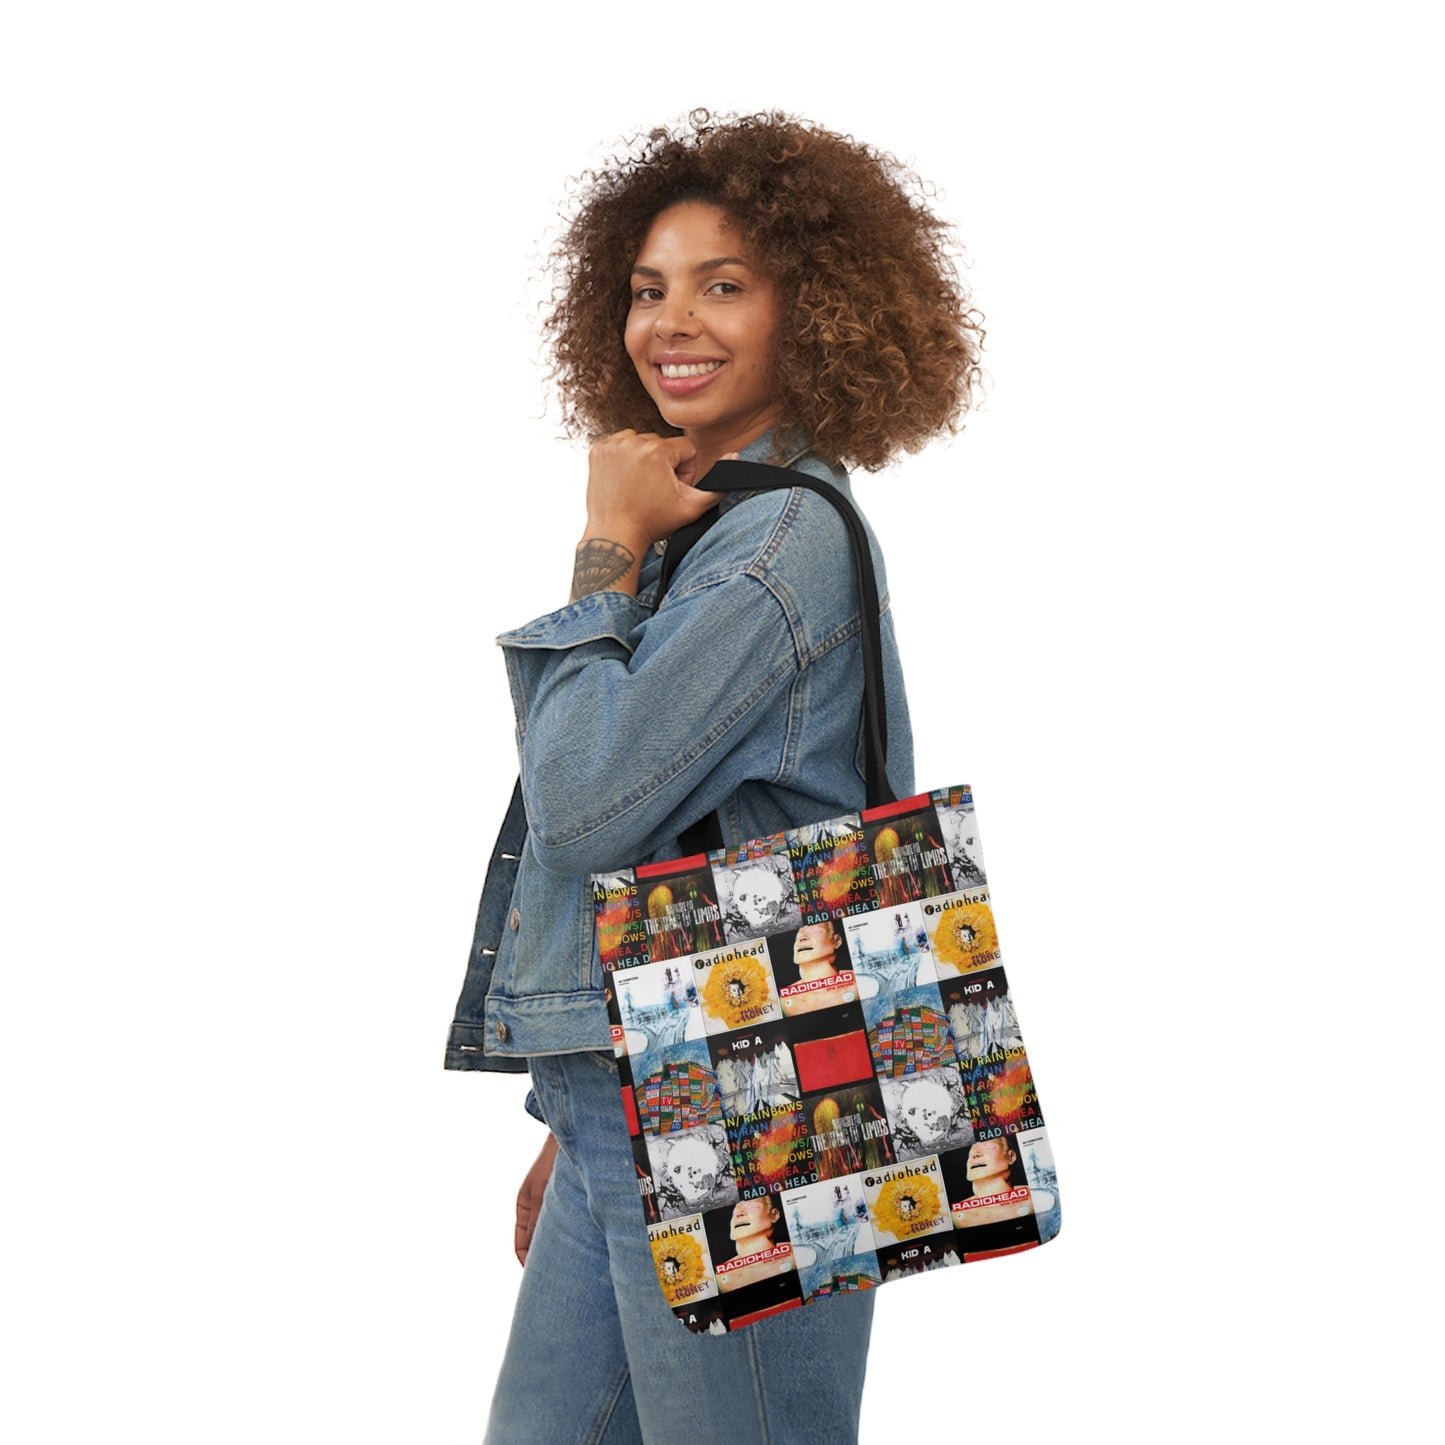 Radiohead Album Cover Collage Polyester Canvas Tote Bag